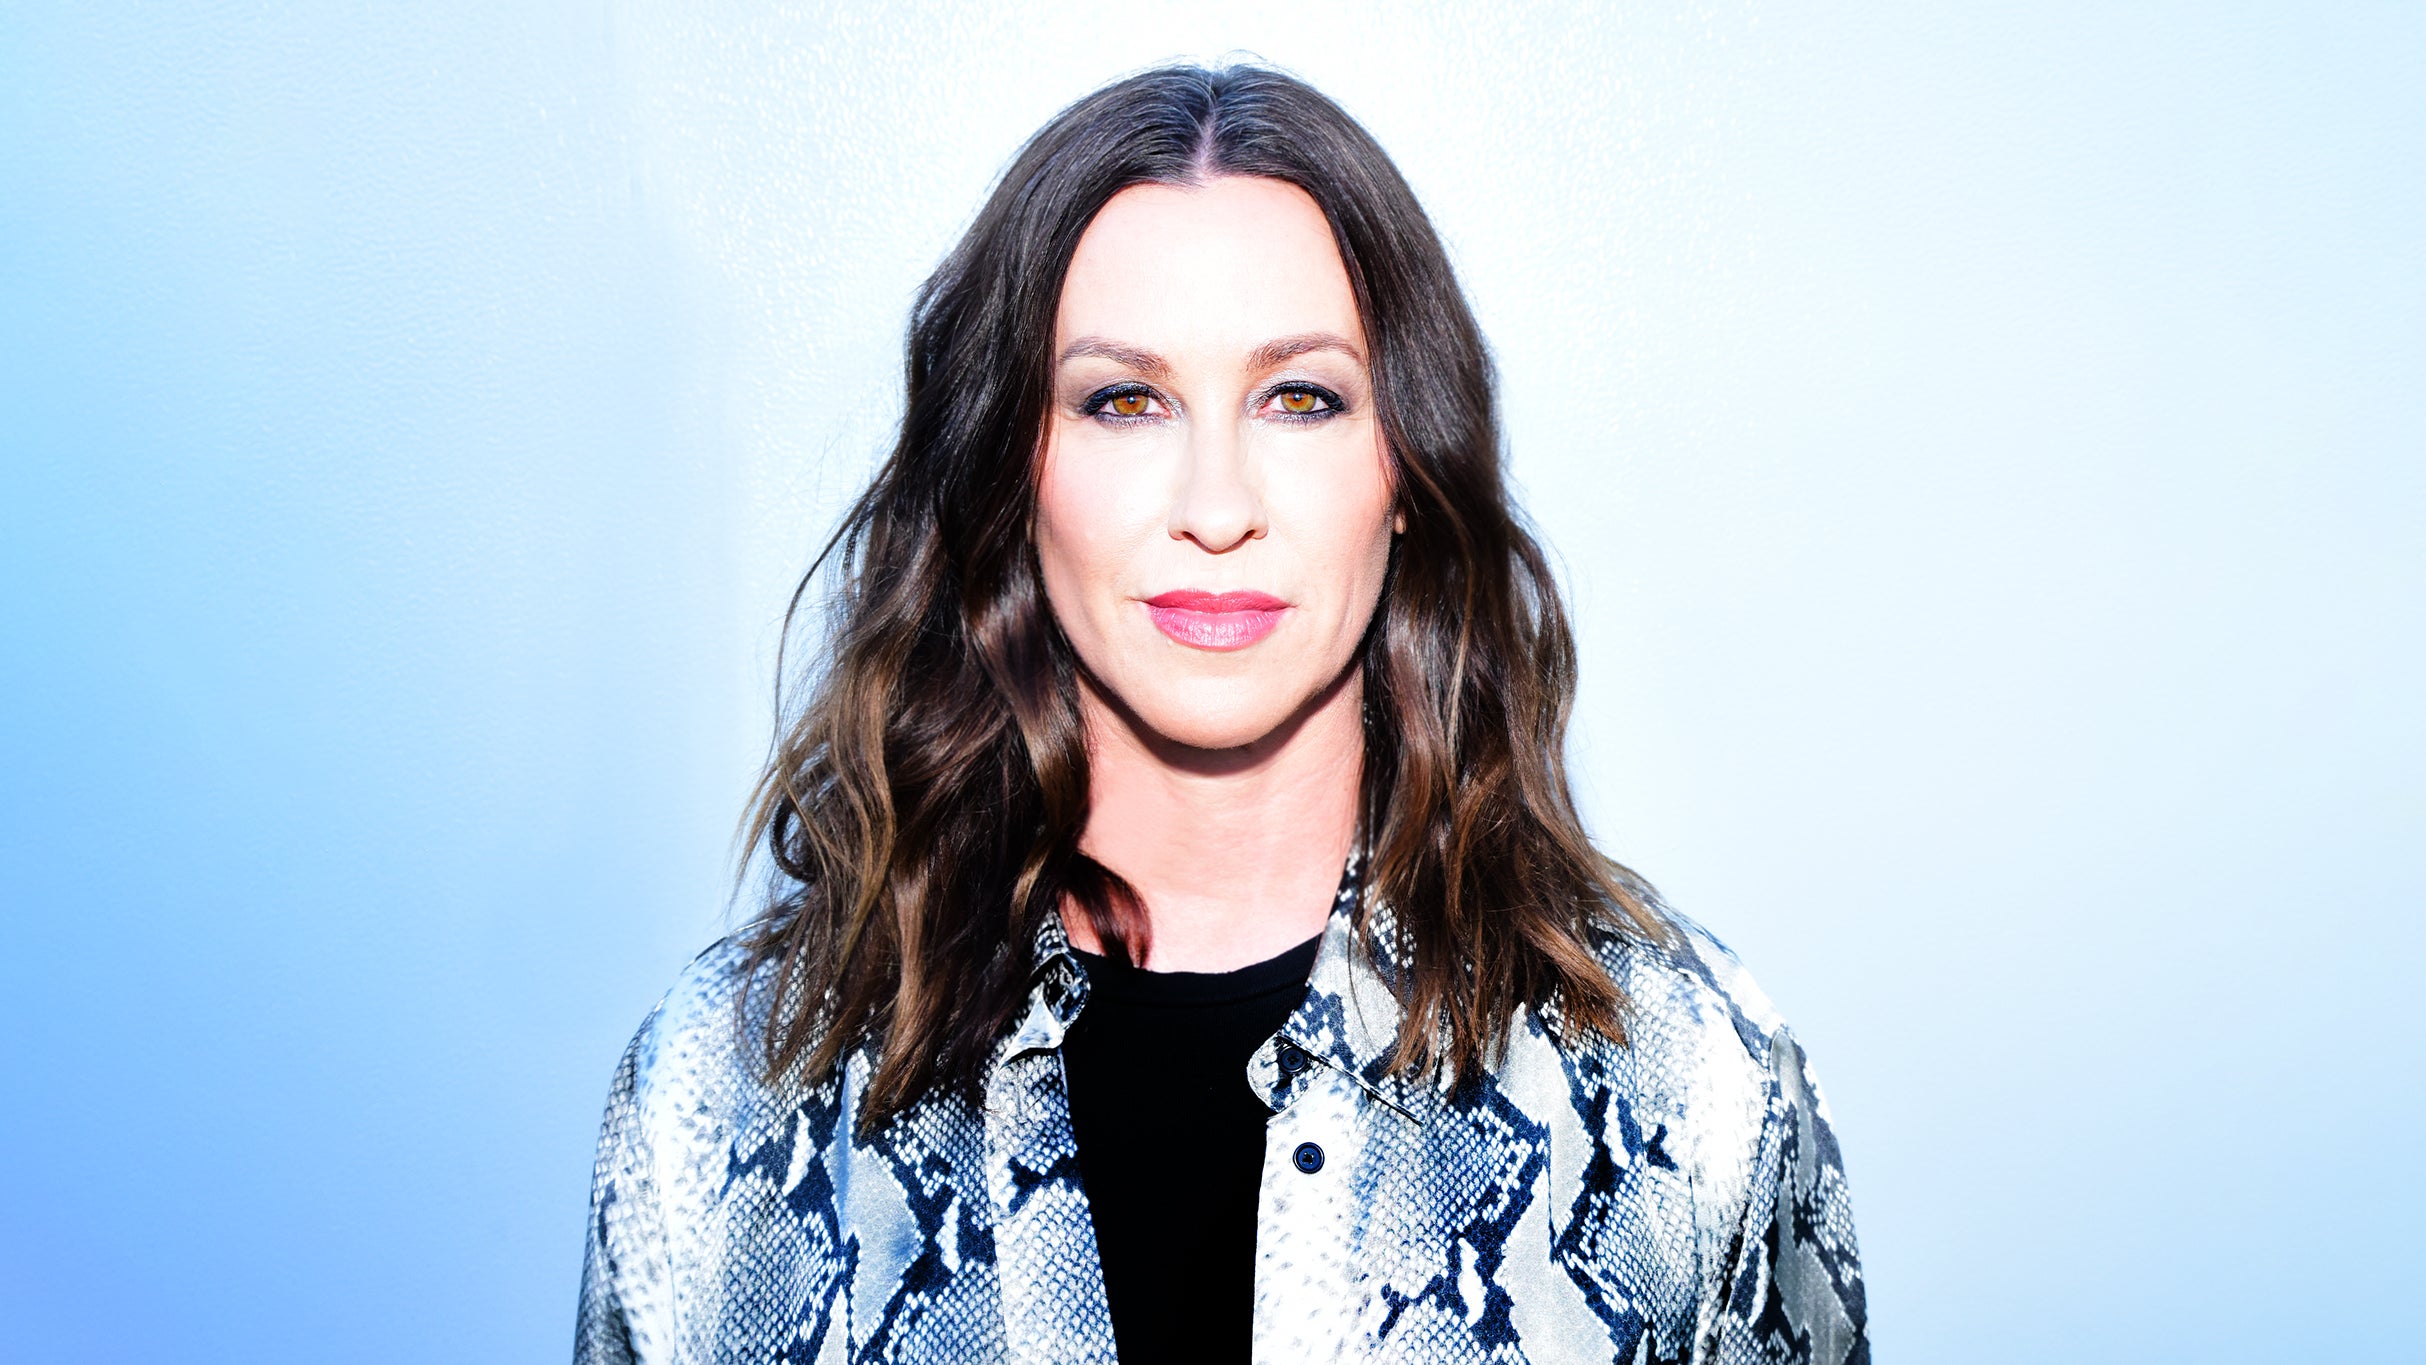 Alanis Morissette - The Triple Moon Tour free presale code for show tickets in Bethel, NY (Bethel Woods Center for the Arts)